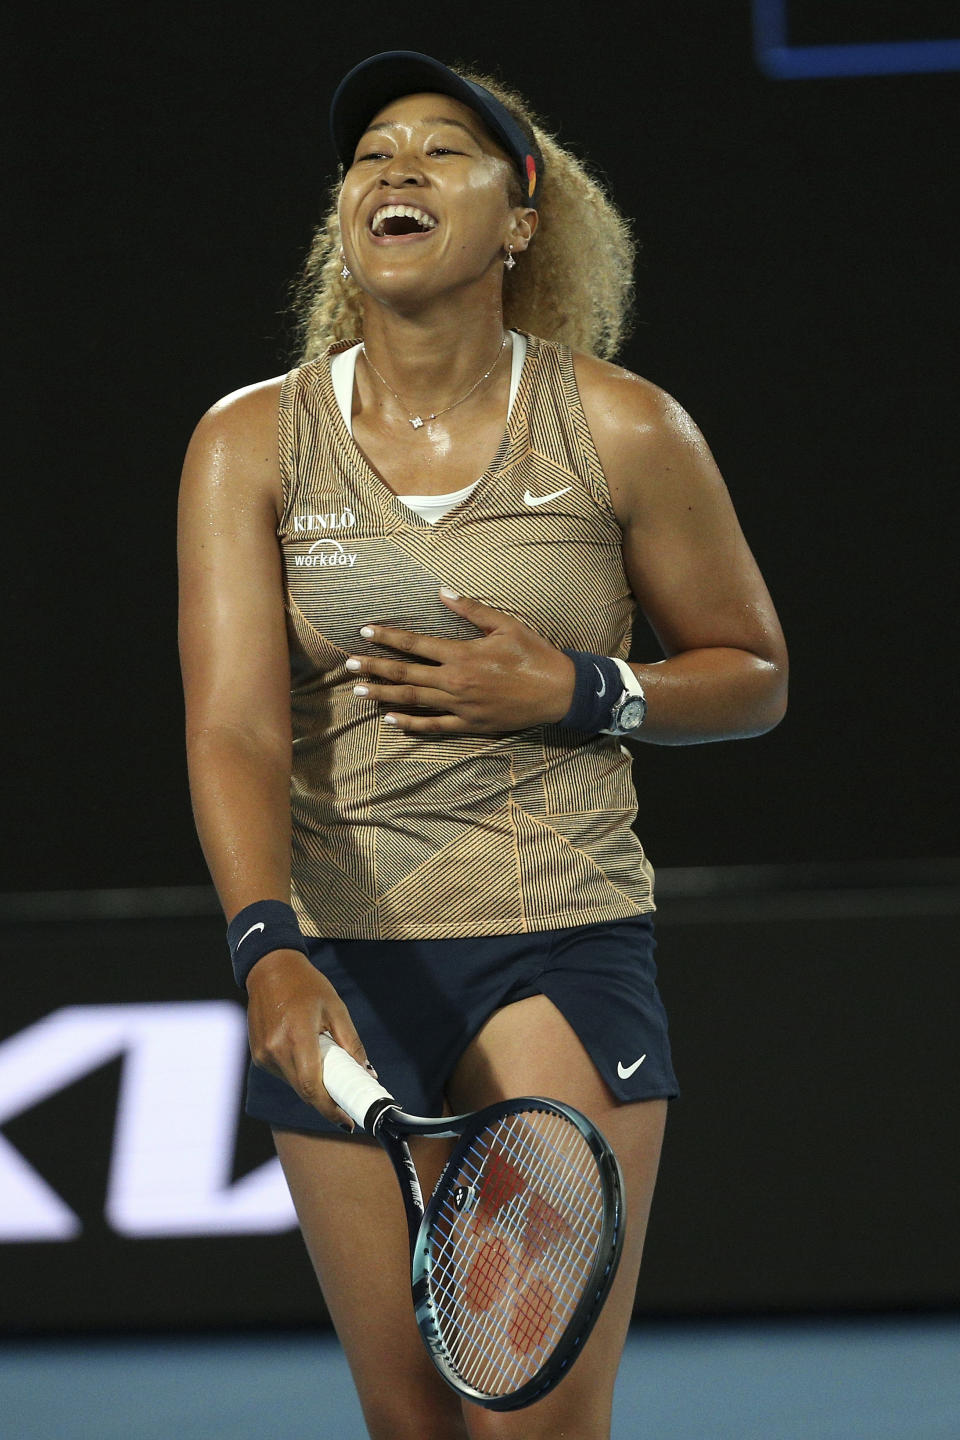 Naomi Osaka of Japan reacts during the singles match against Andrea Petkovic of Germany, at Summer Set tennis tournament ahead of the Australian Open in Melbourne, Australia, Friday, Jan. 7, 2022. (AP Photo/Hamish Blair)